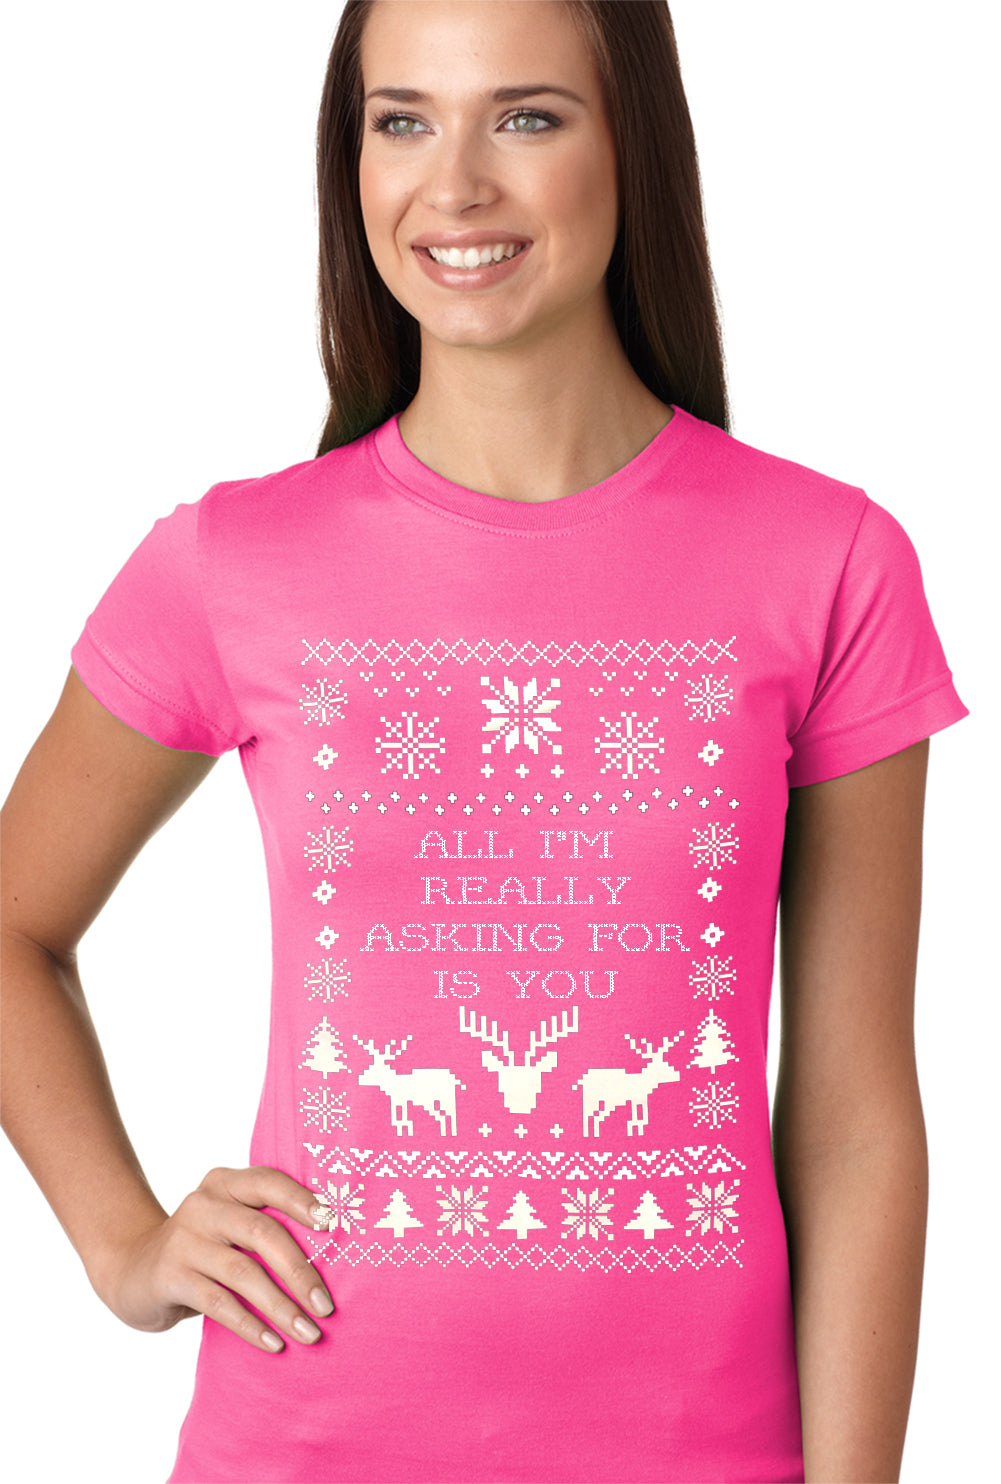 All I'm Really Asking For Is You Ugly Christmas Girls T-shirt Hot Pink